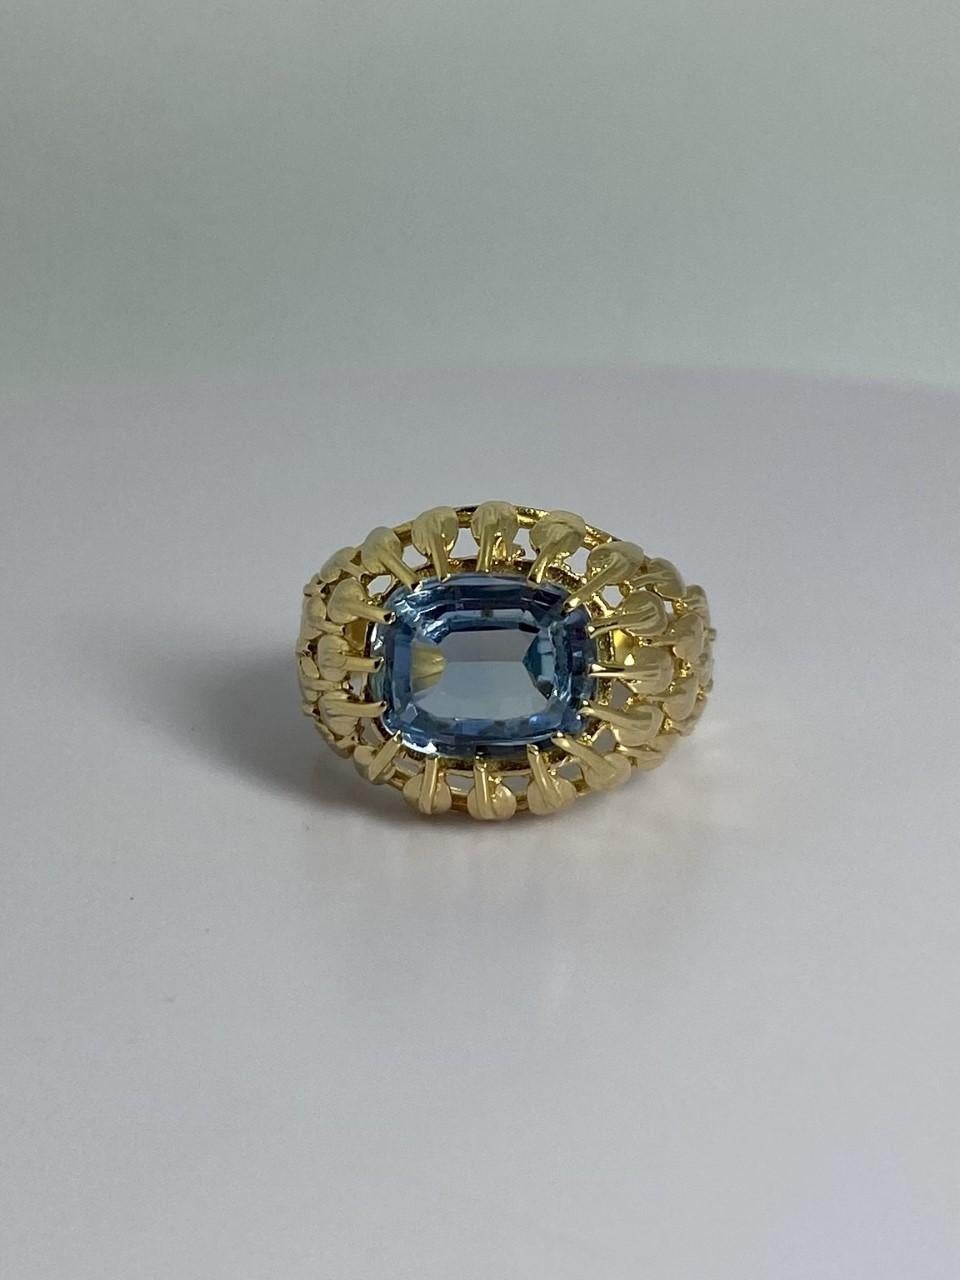 A ring to make your appearance! This pre-loved jewel is made 18 carat yellow gold with a blue spinel. The oval blue spinel is emerald facetted.  Look close at the pictures and see the detailed crafted band of this ring. If you need a re-size, just